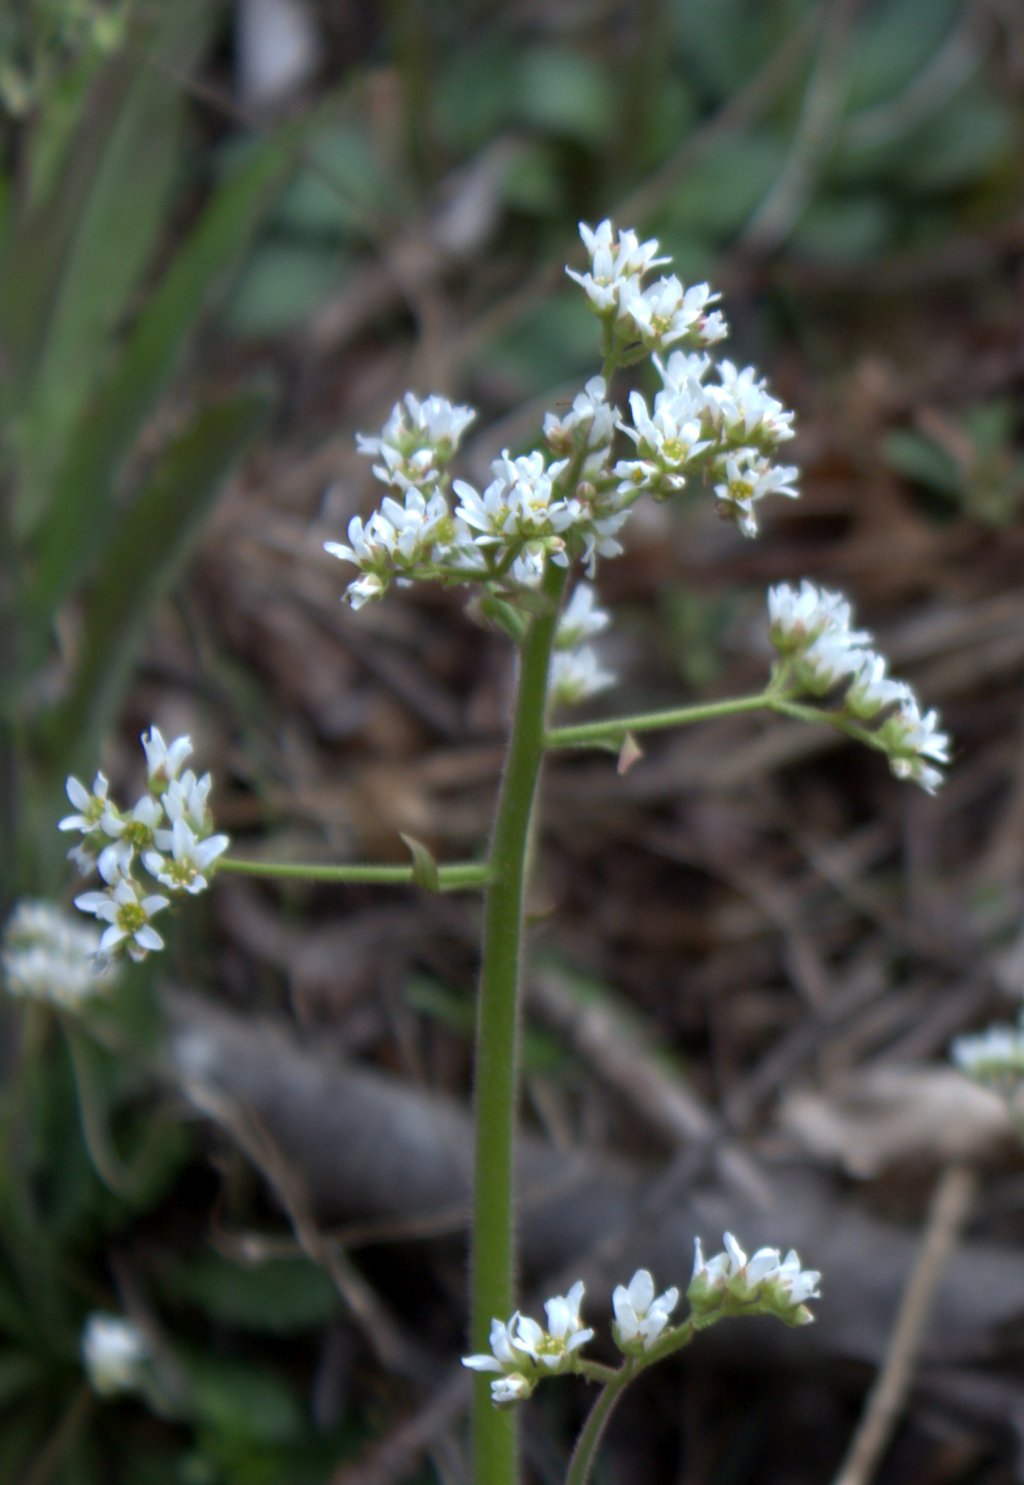 A central hairy stem ends in clusters of small white flowers.